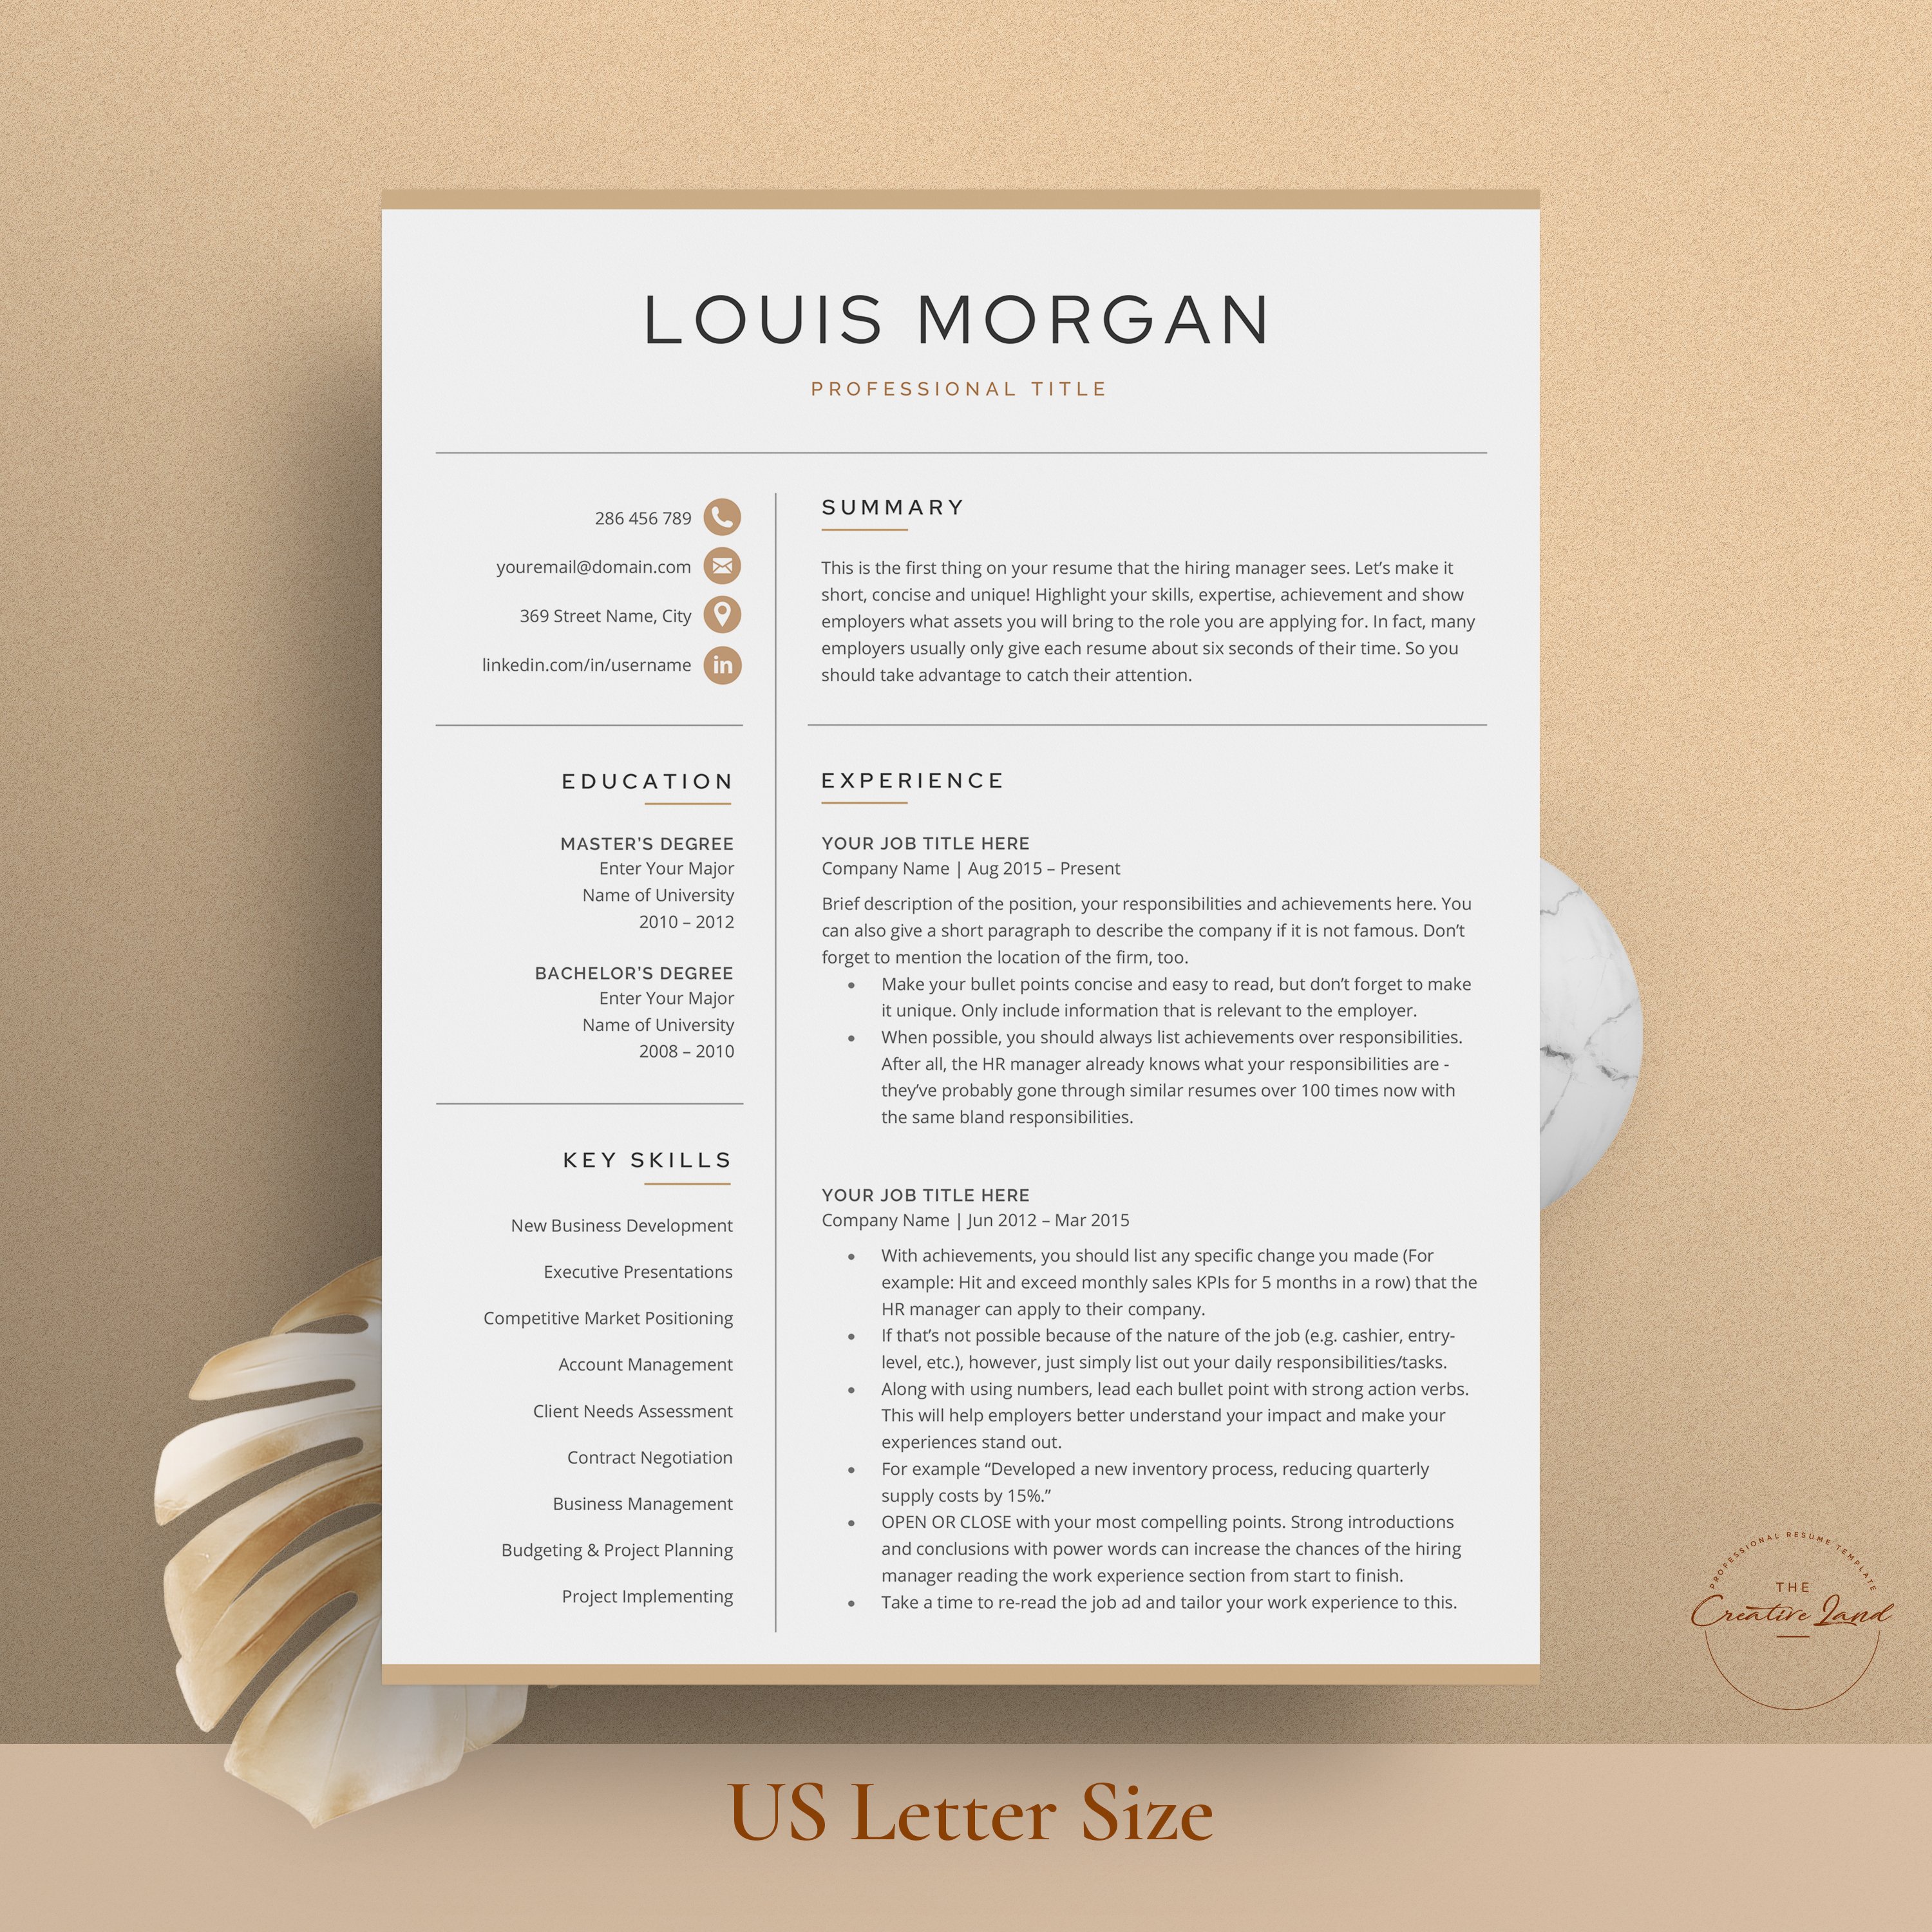 Resume/CV - The Louis preview image.